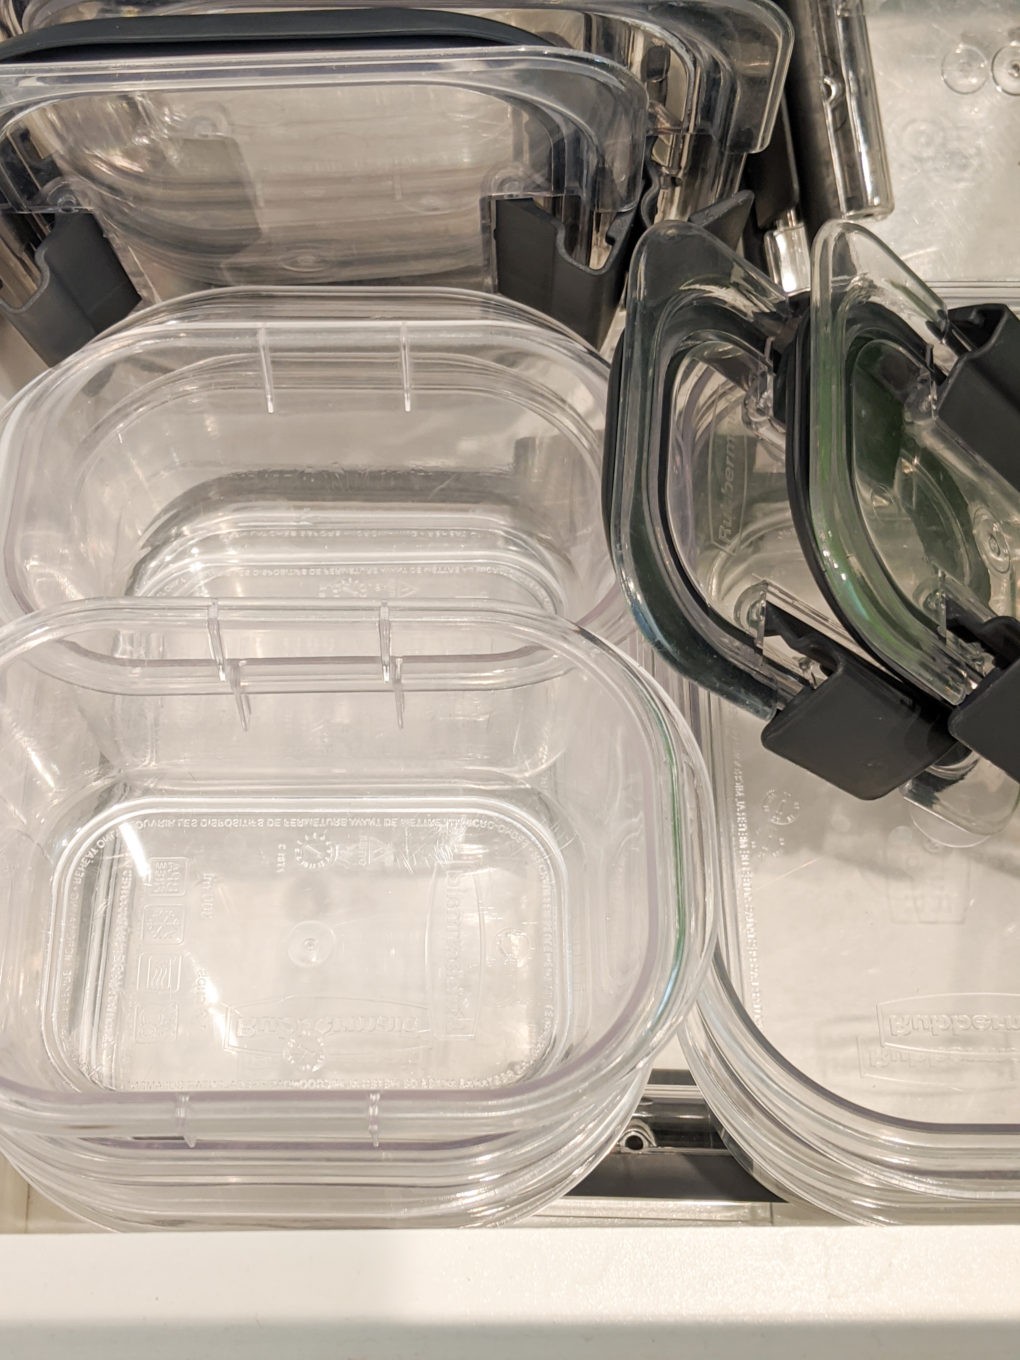 Rubbermaid food containers -- Environmentally friendly switches to use less single-use plastic bags, plastic wrap, dryer sheets, etc. Reusable ideas and ways to be eco friendly.